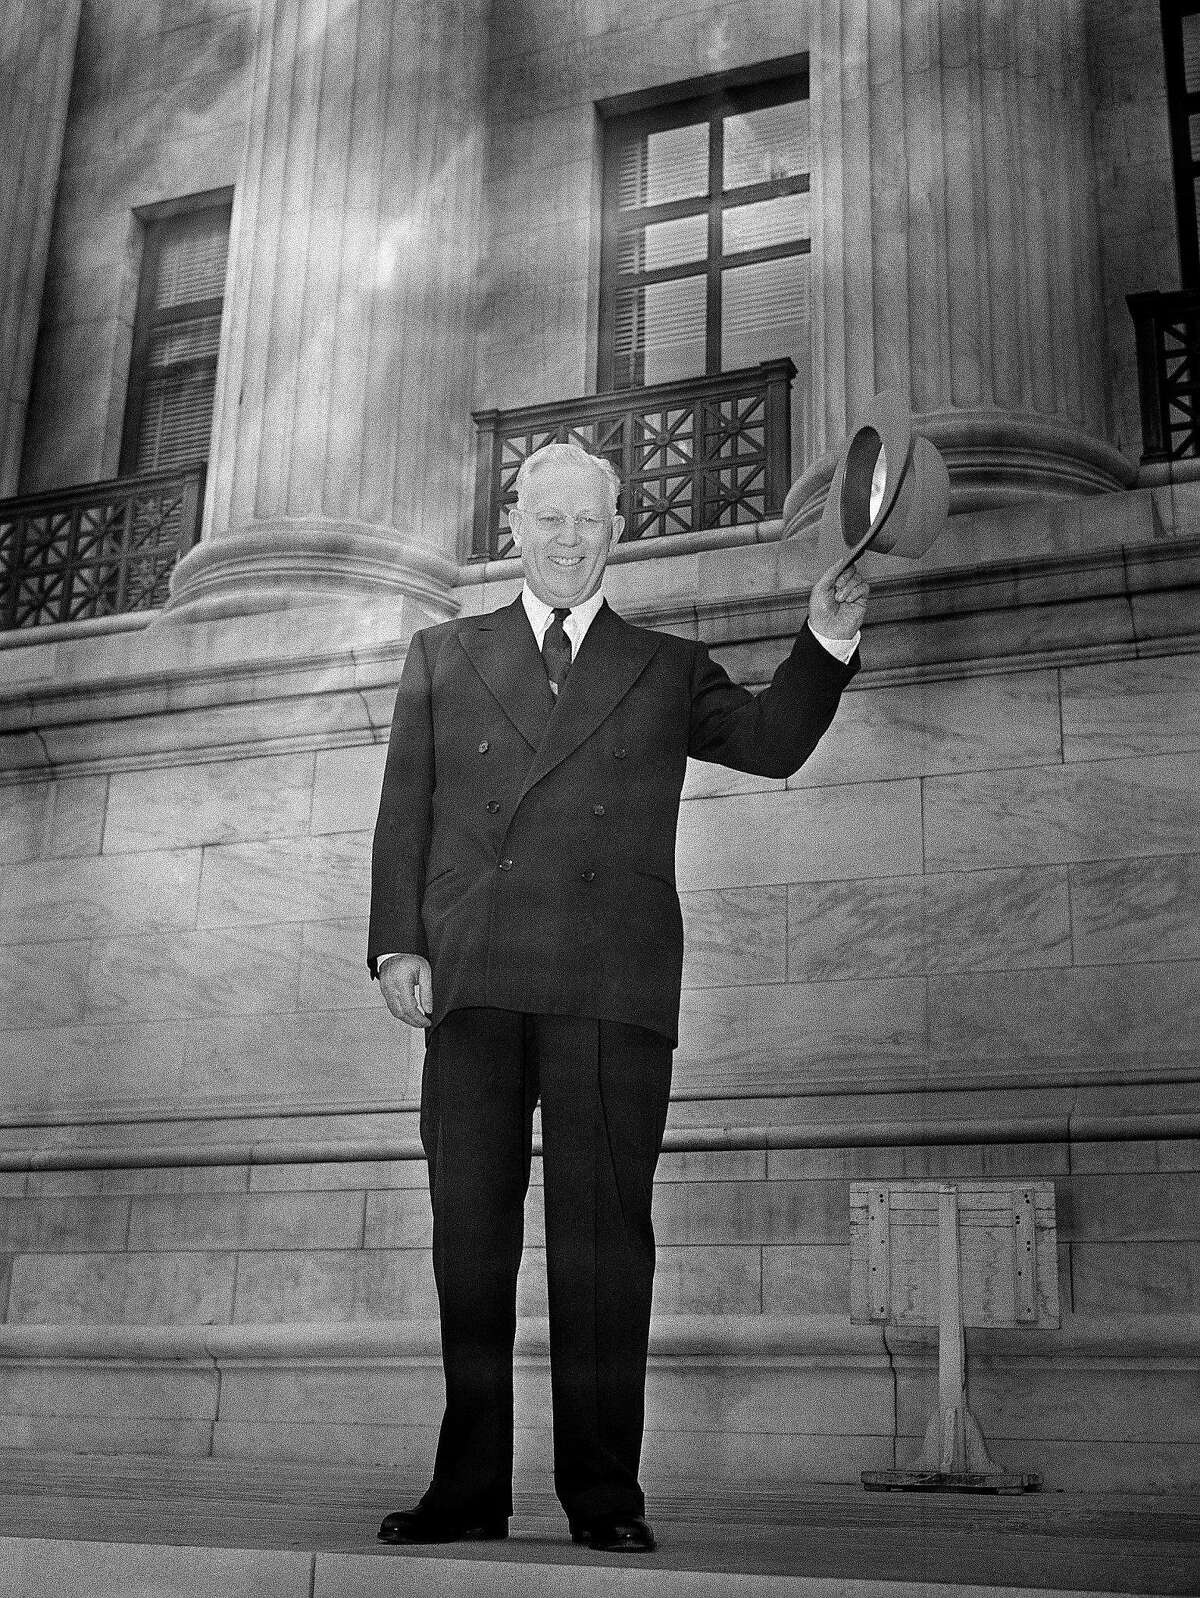 Earl Warren smiles and waves while standing at the base of the two pillars of the Supreme Court building in Washington, D.C., Oct. 5, 1953 after arriving to become the 14th Chief Justice of the United States. (AP Photo/Henry Griffin)